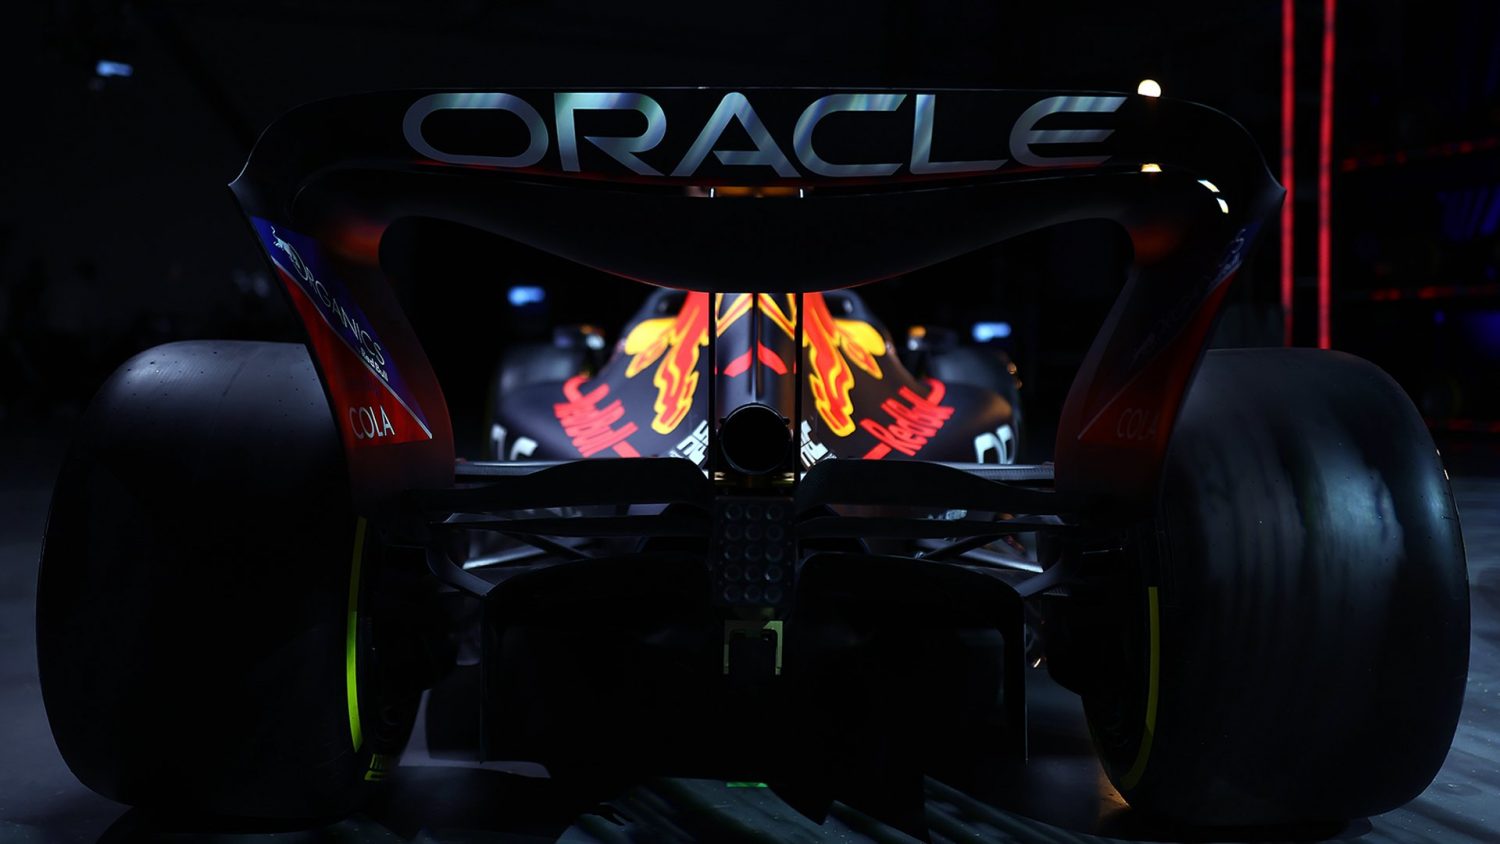 Red Bull launches 2022 F1 livery on RB18 show car